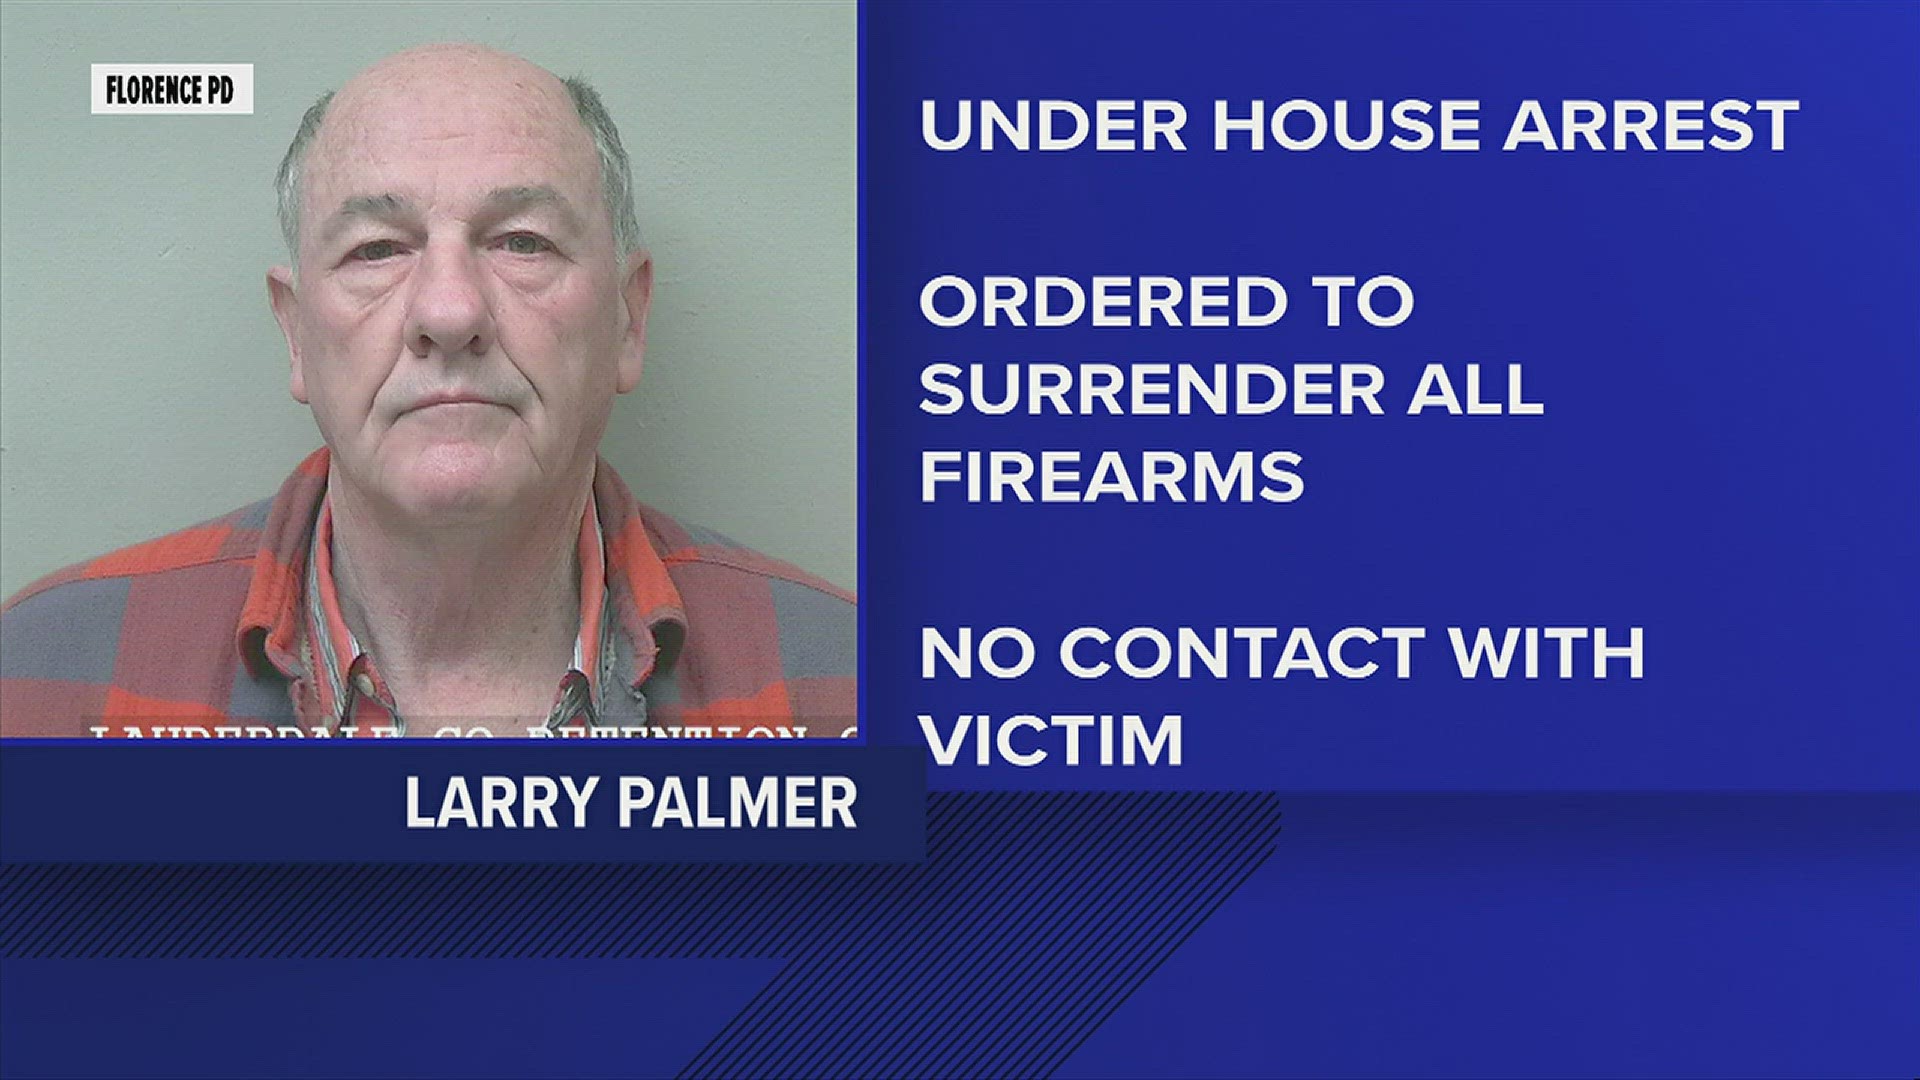 Larry Palmer must relinquish his guns and have no further contact with the victim.